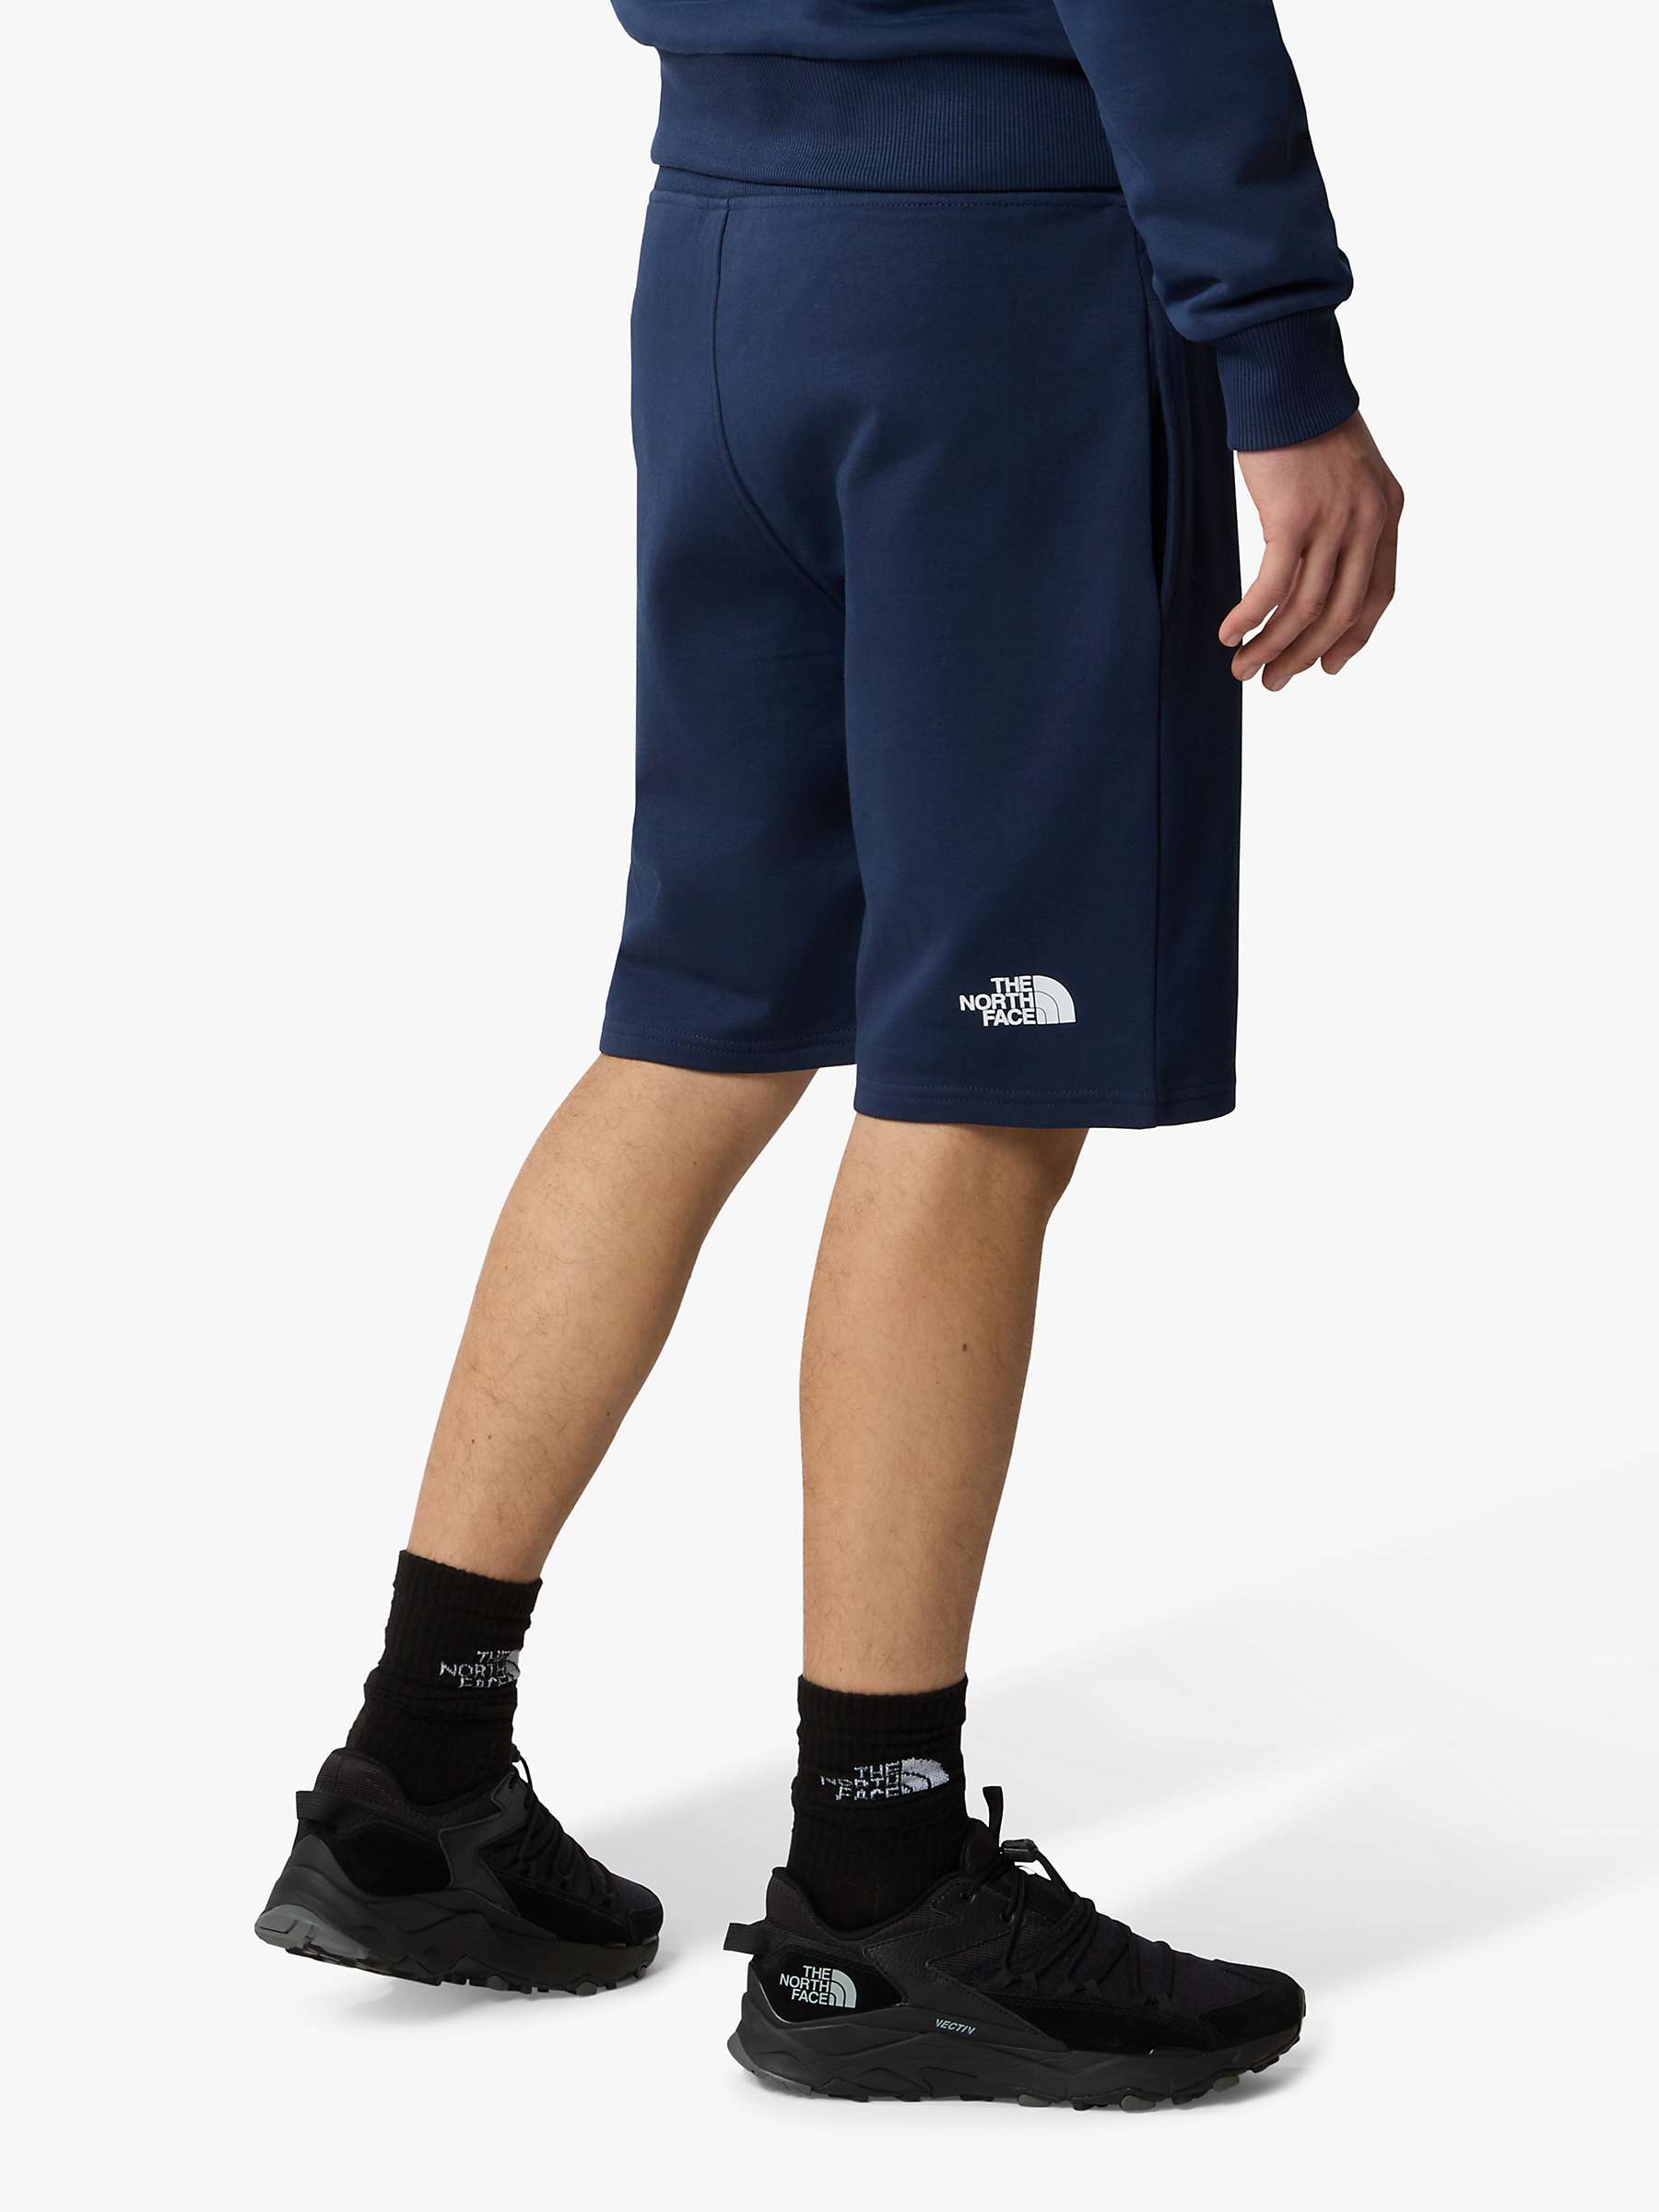 Buy The North Face Cotton Shorts, Summit Navy Online at johnlewis.com